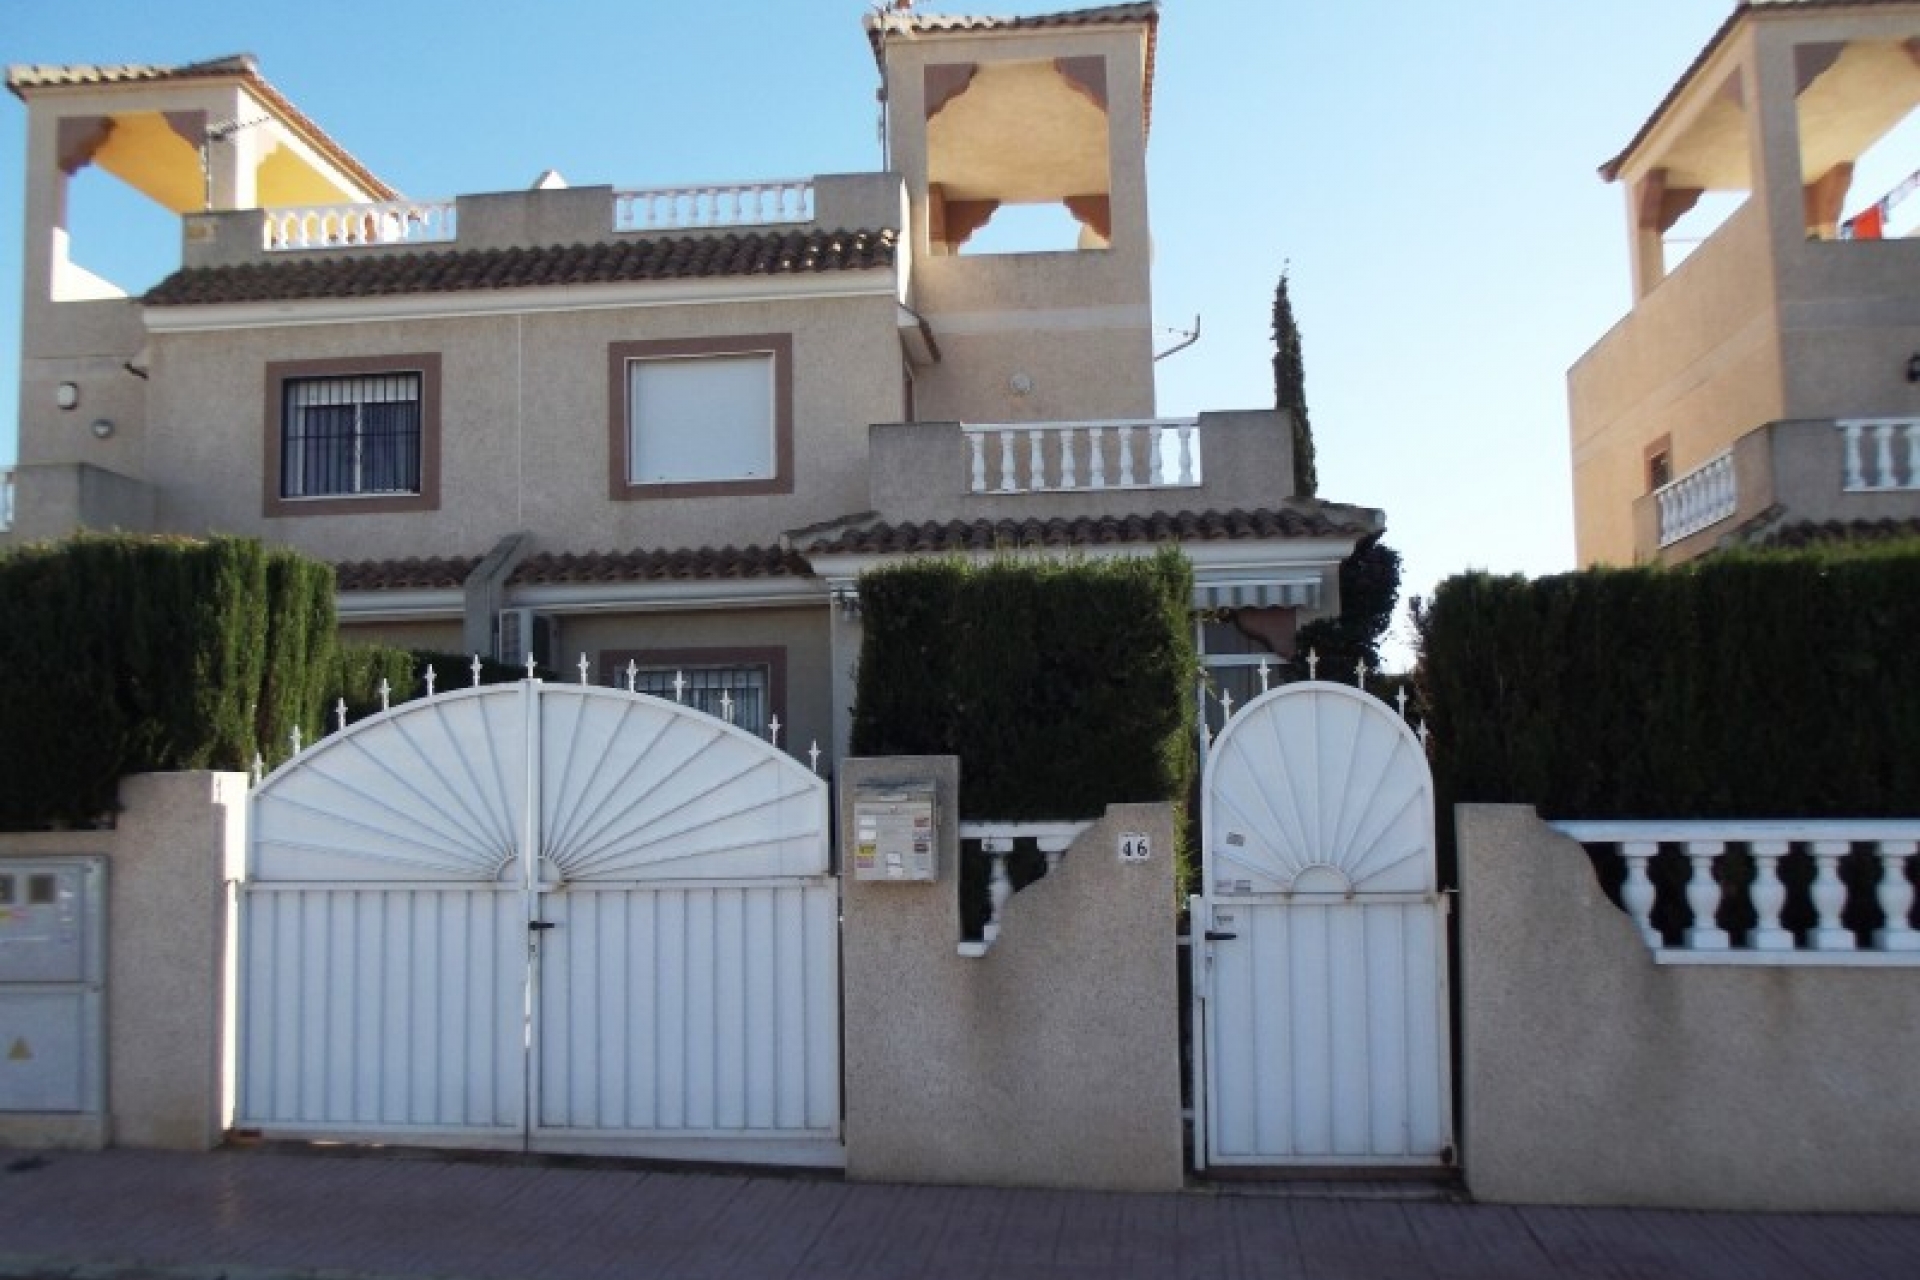 For sale cheap property Spain Costa Blanca